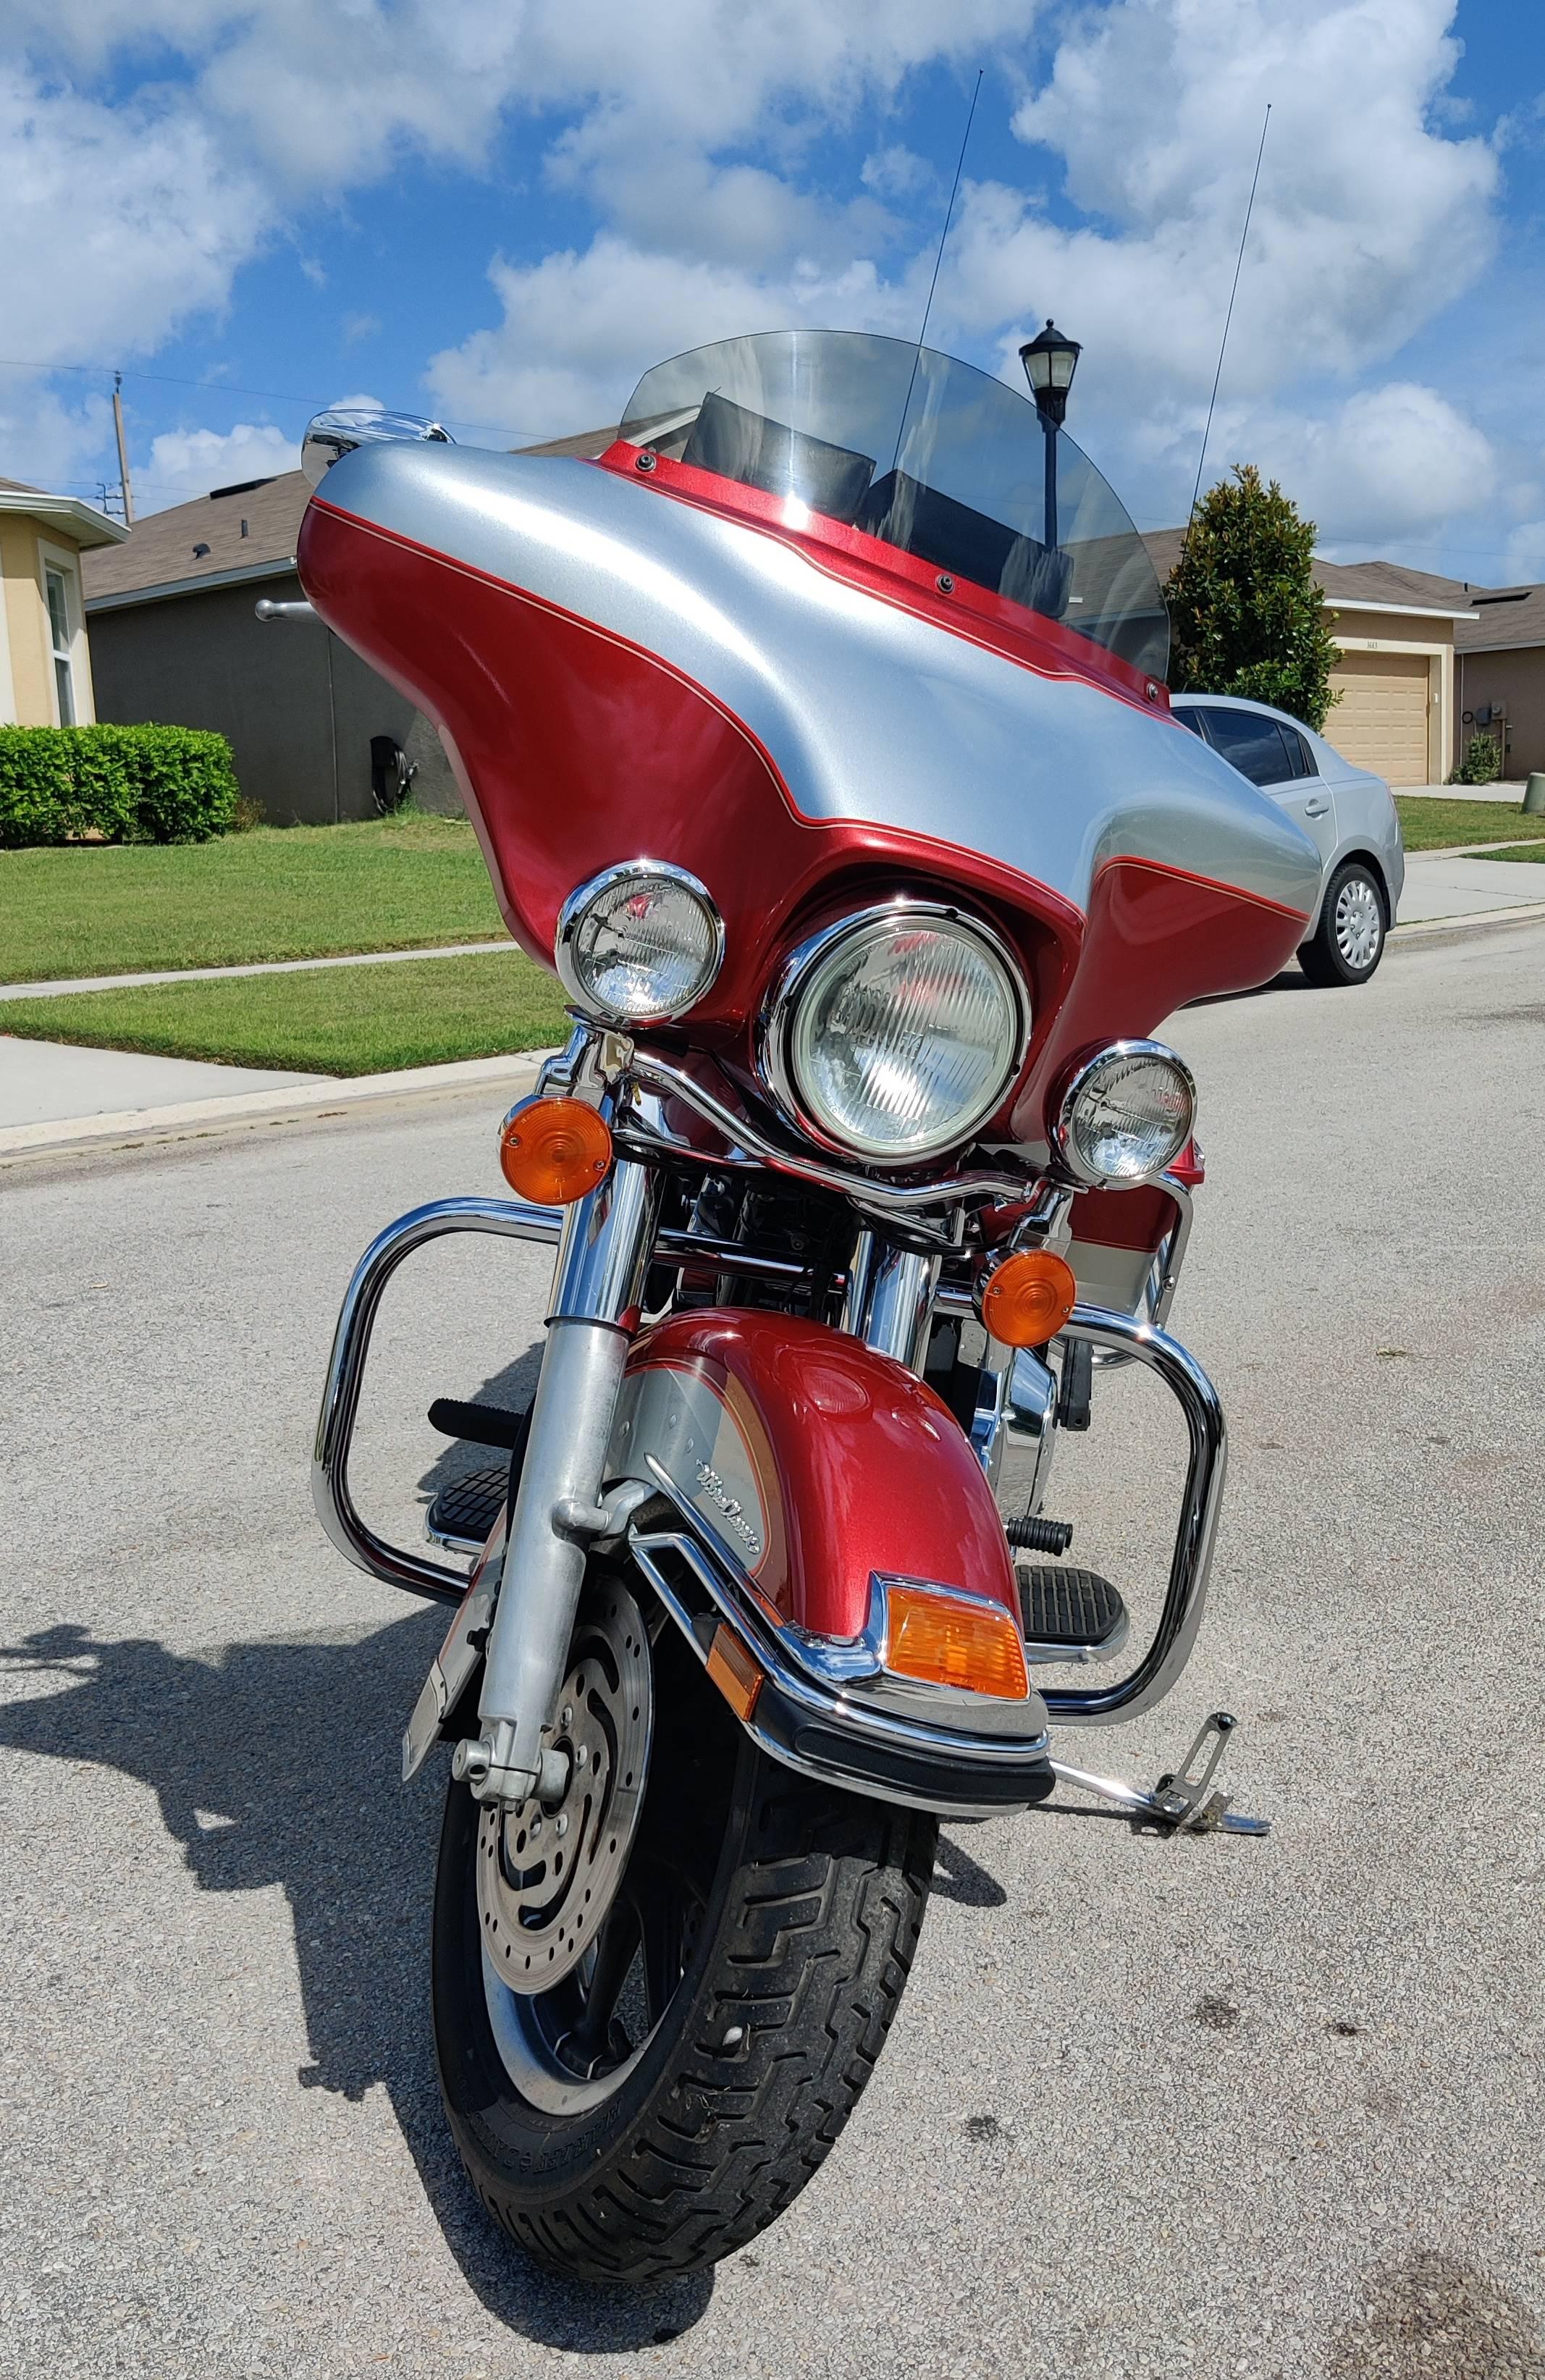 2004 Harley Davidson ultra classic. Excellent condition. Only 18,000 miles.